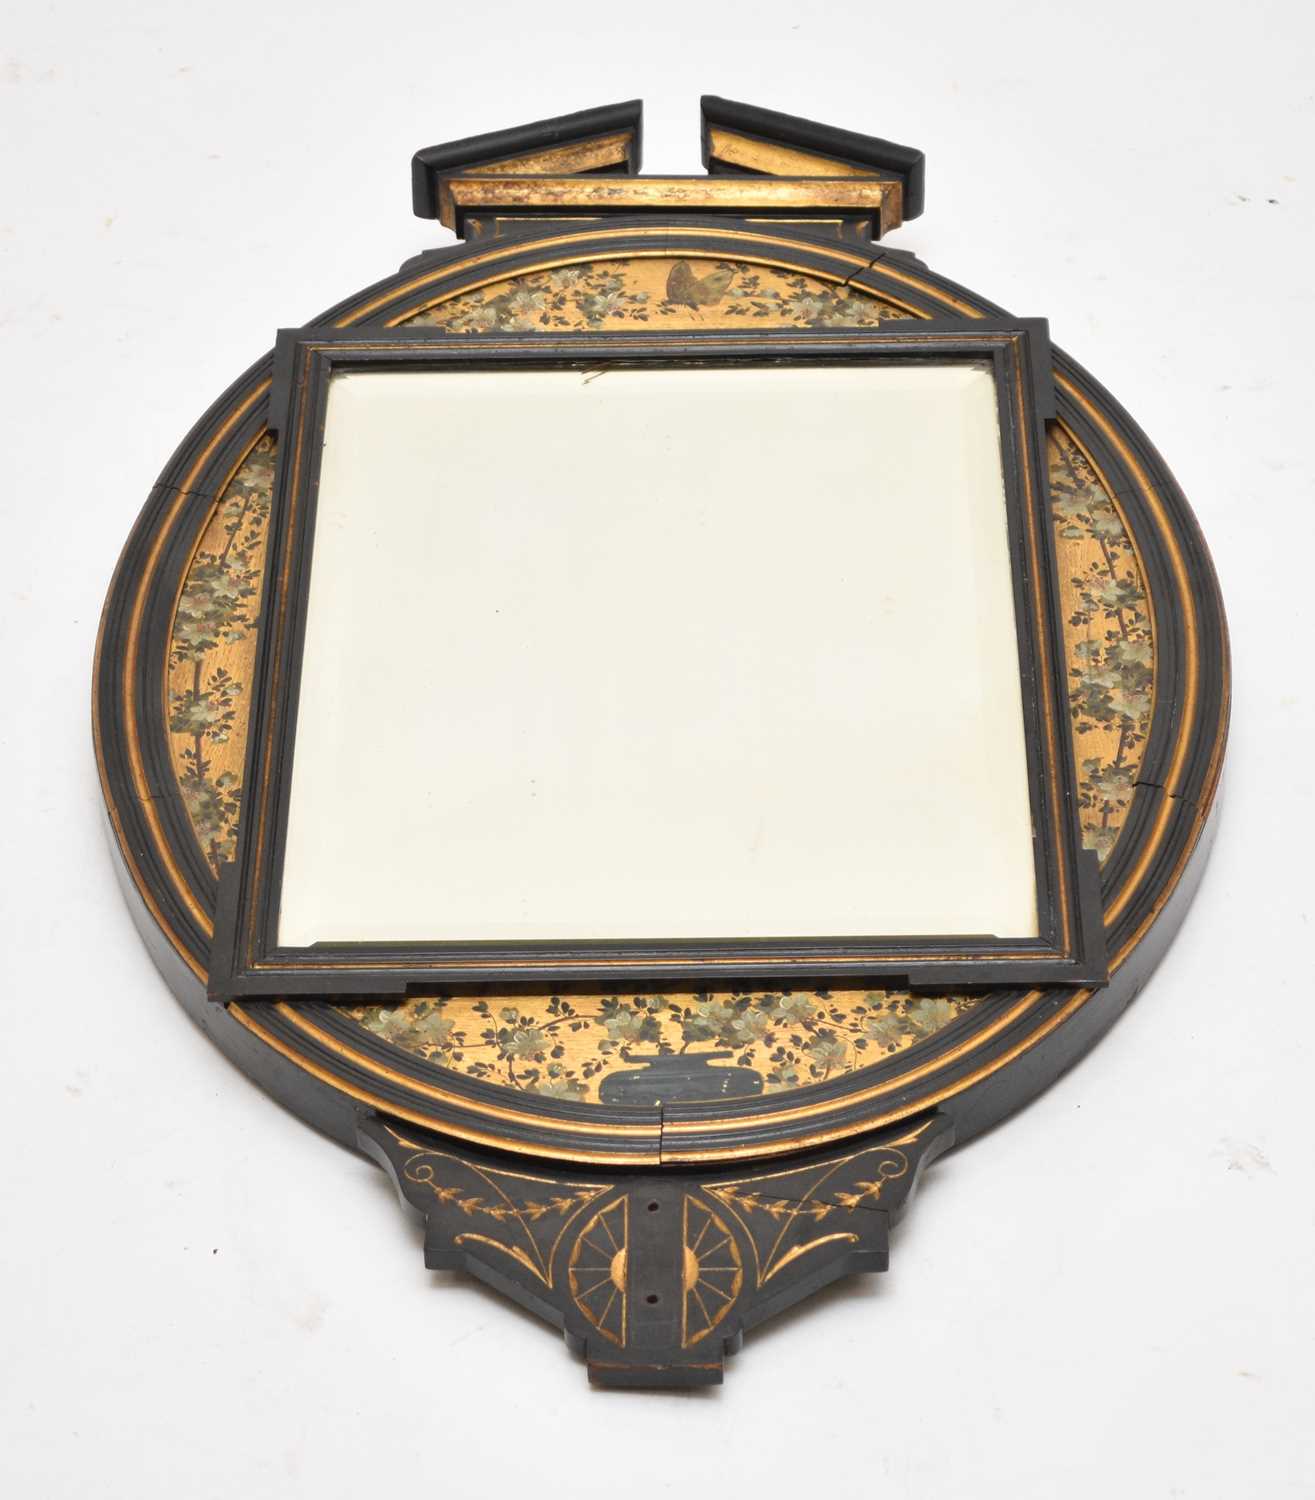 Lot 73 - A late 19th century, Aesthetic period, ebonised and gilded wall mirror